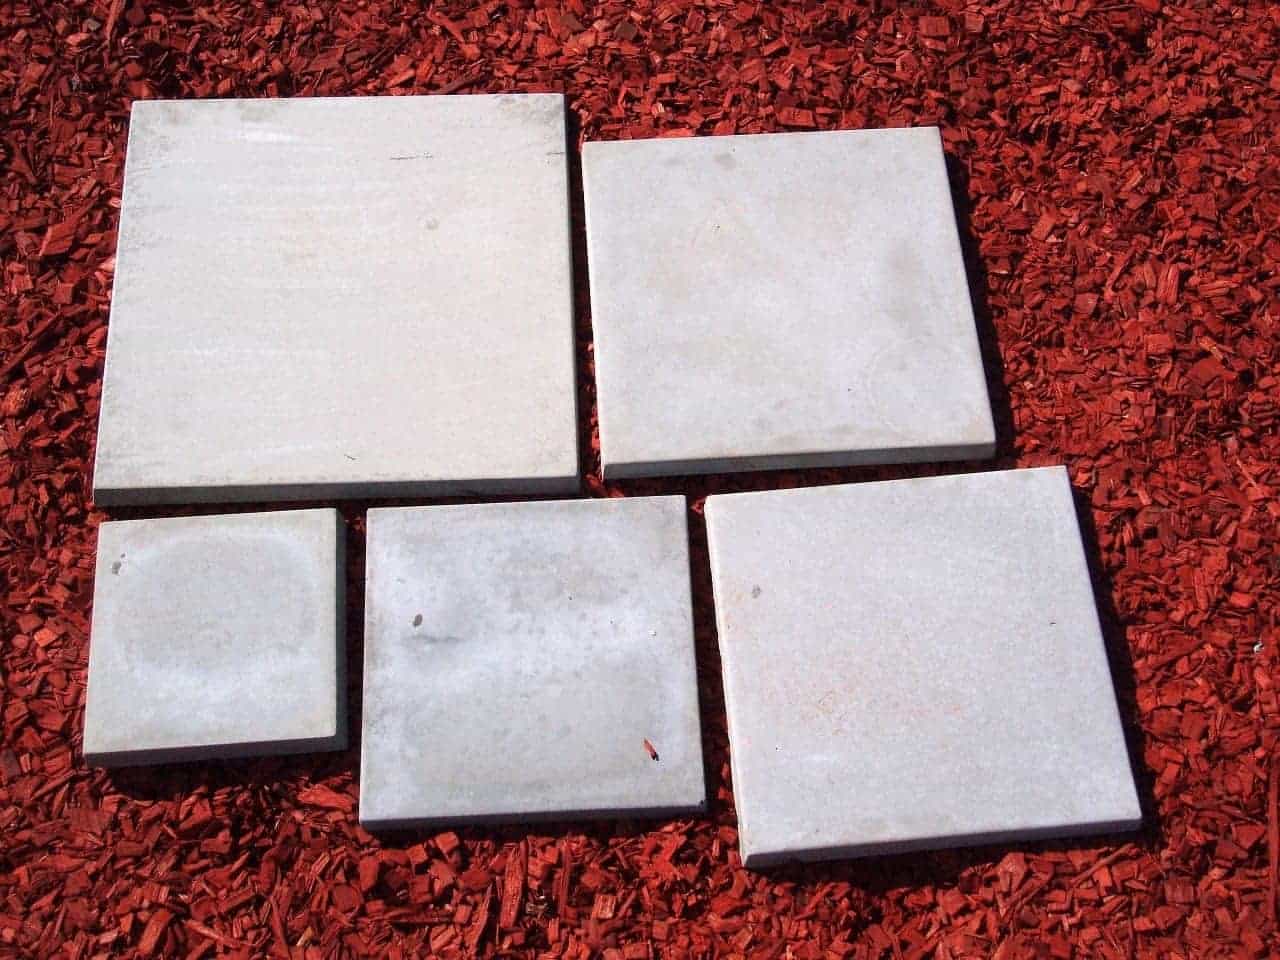 Austwide2000 - Garden Products, Paving Slabs, Building Supplies